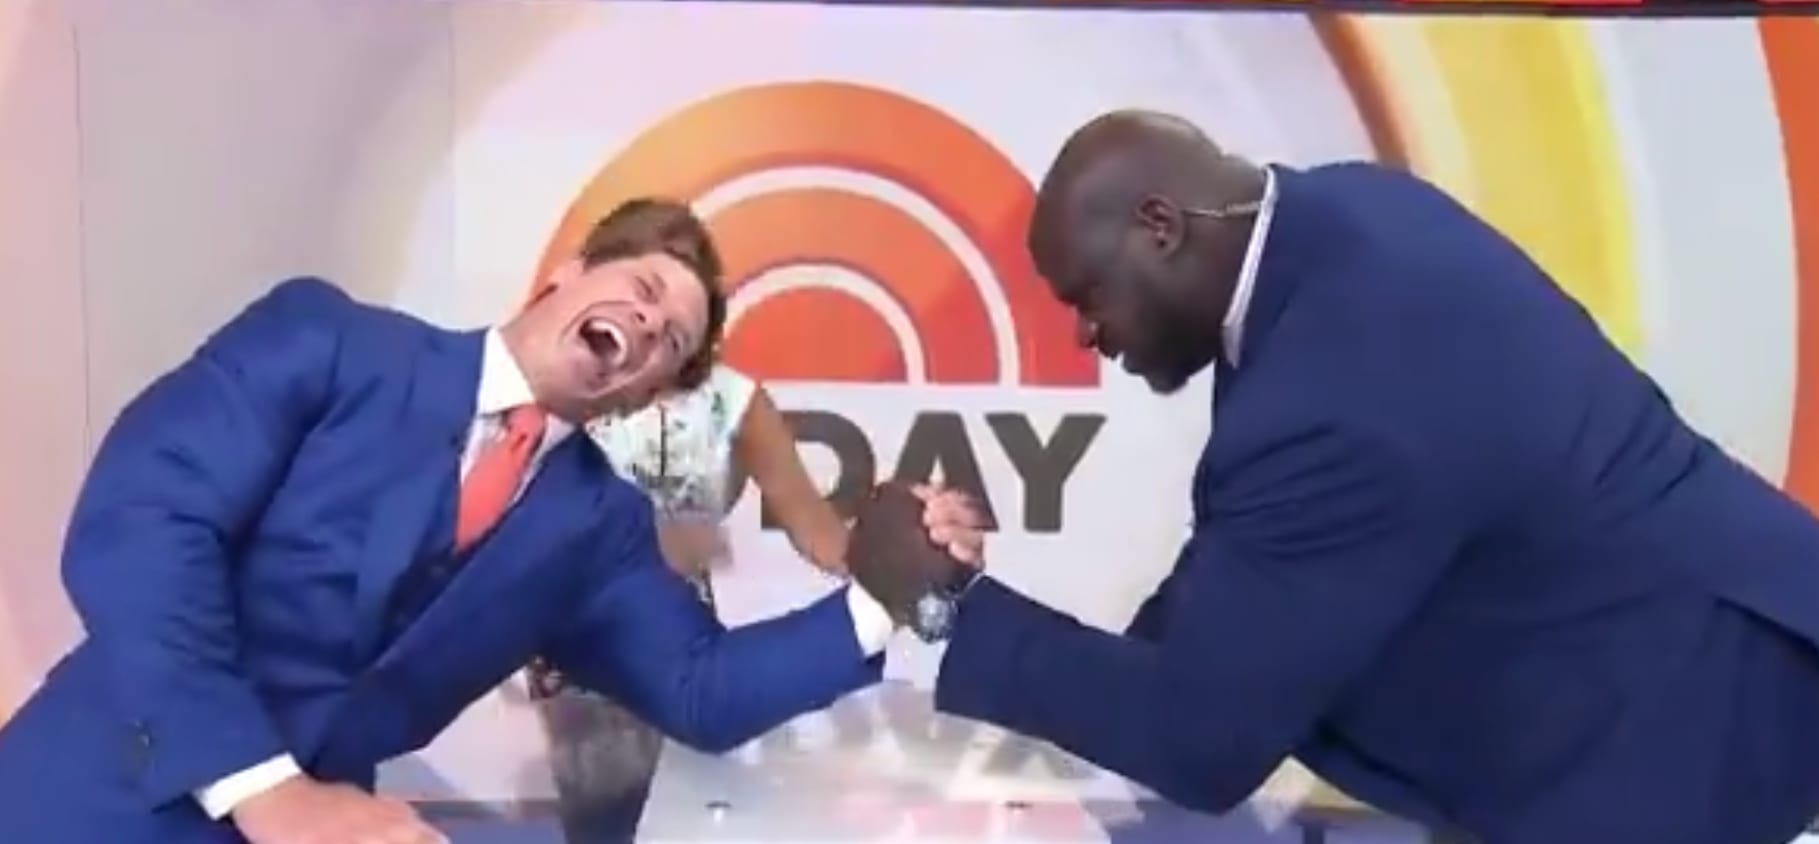 Shaquille O’Neal Says John Cena’s New Hair Looks Sexy Before Arm Wrestling Him